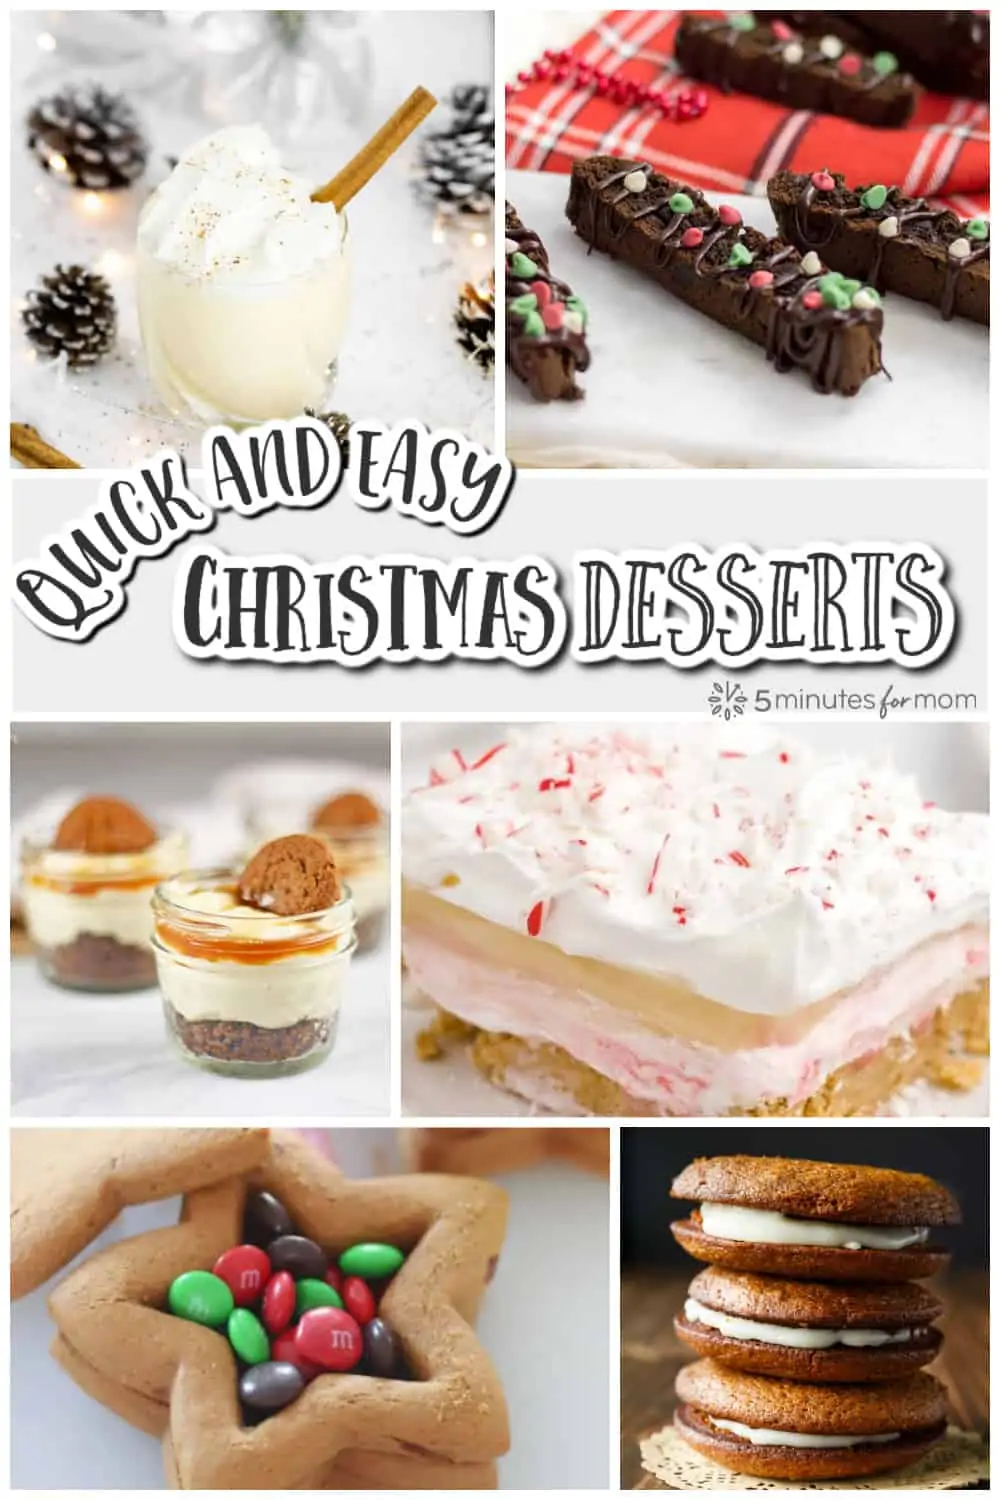 Collage of desserts - Text says "Quick and Easy Christmas Desserts"